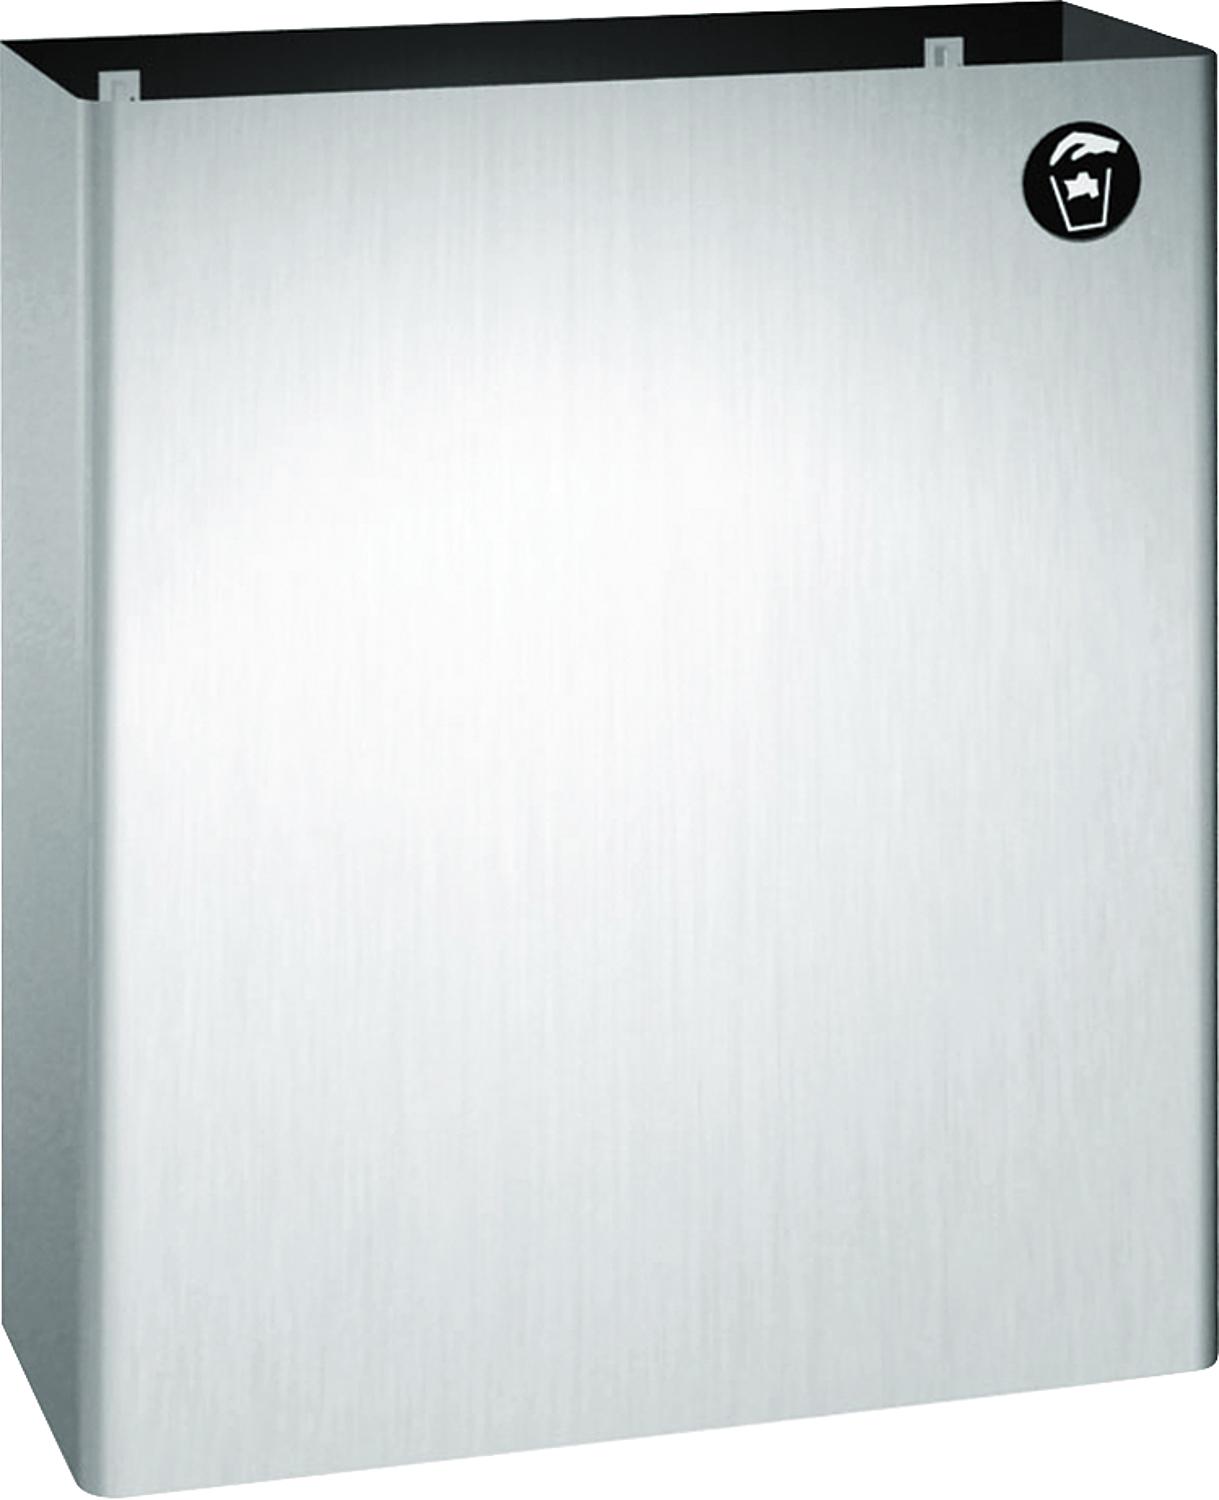 asdec life ® waste bin stainless steel for wall mounting, 356 x 432mm